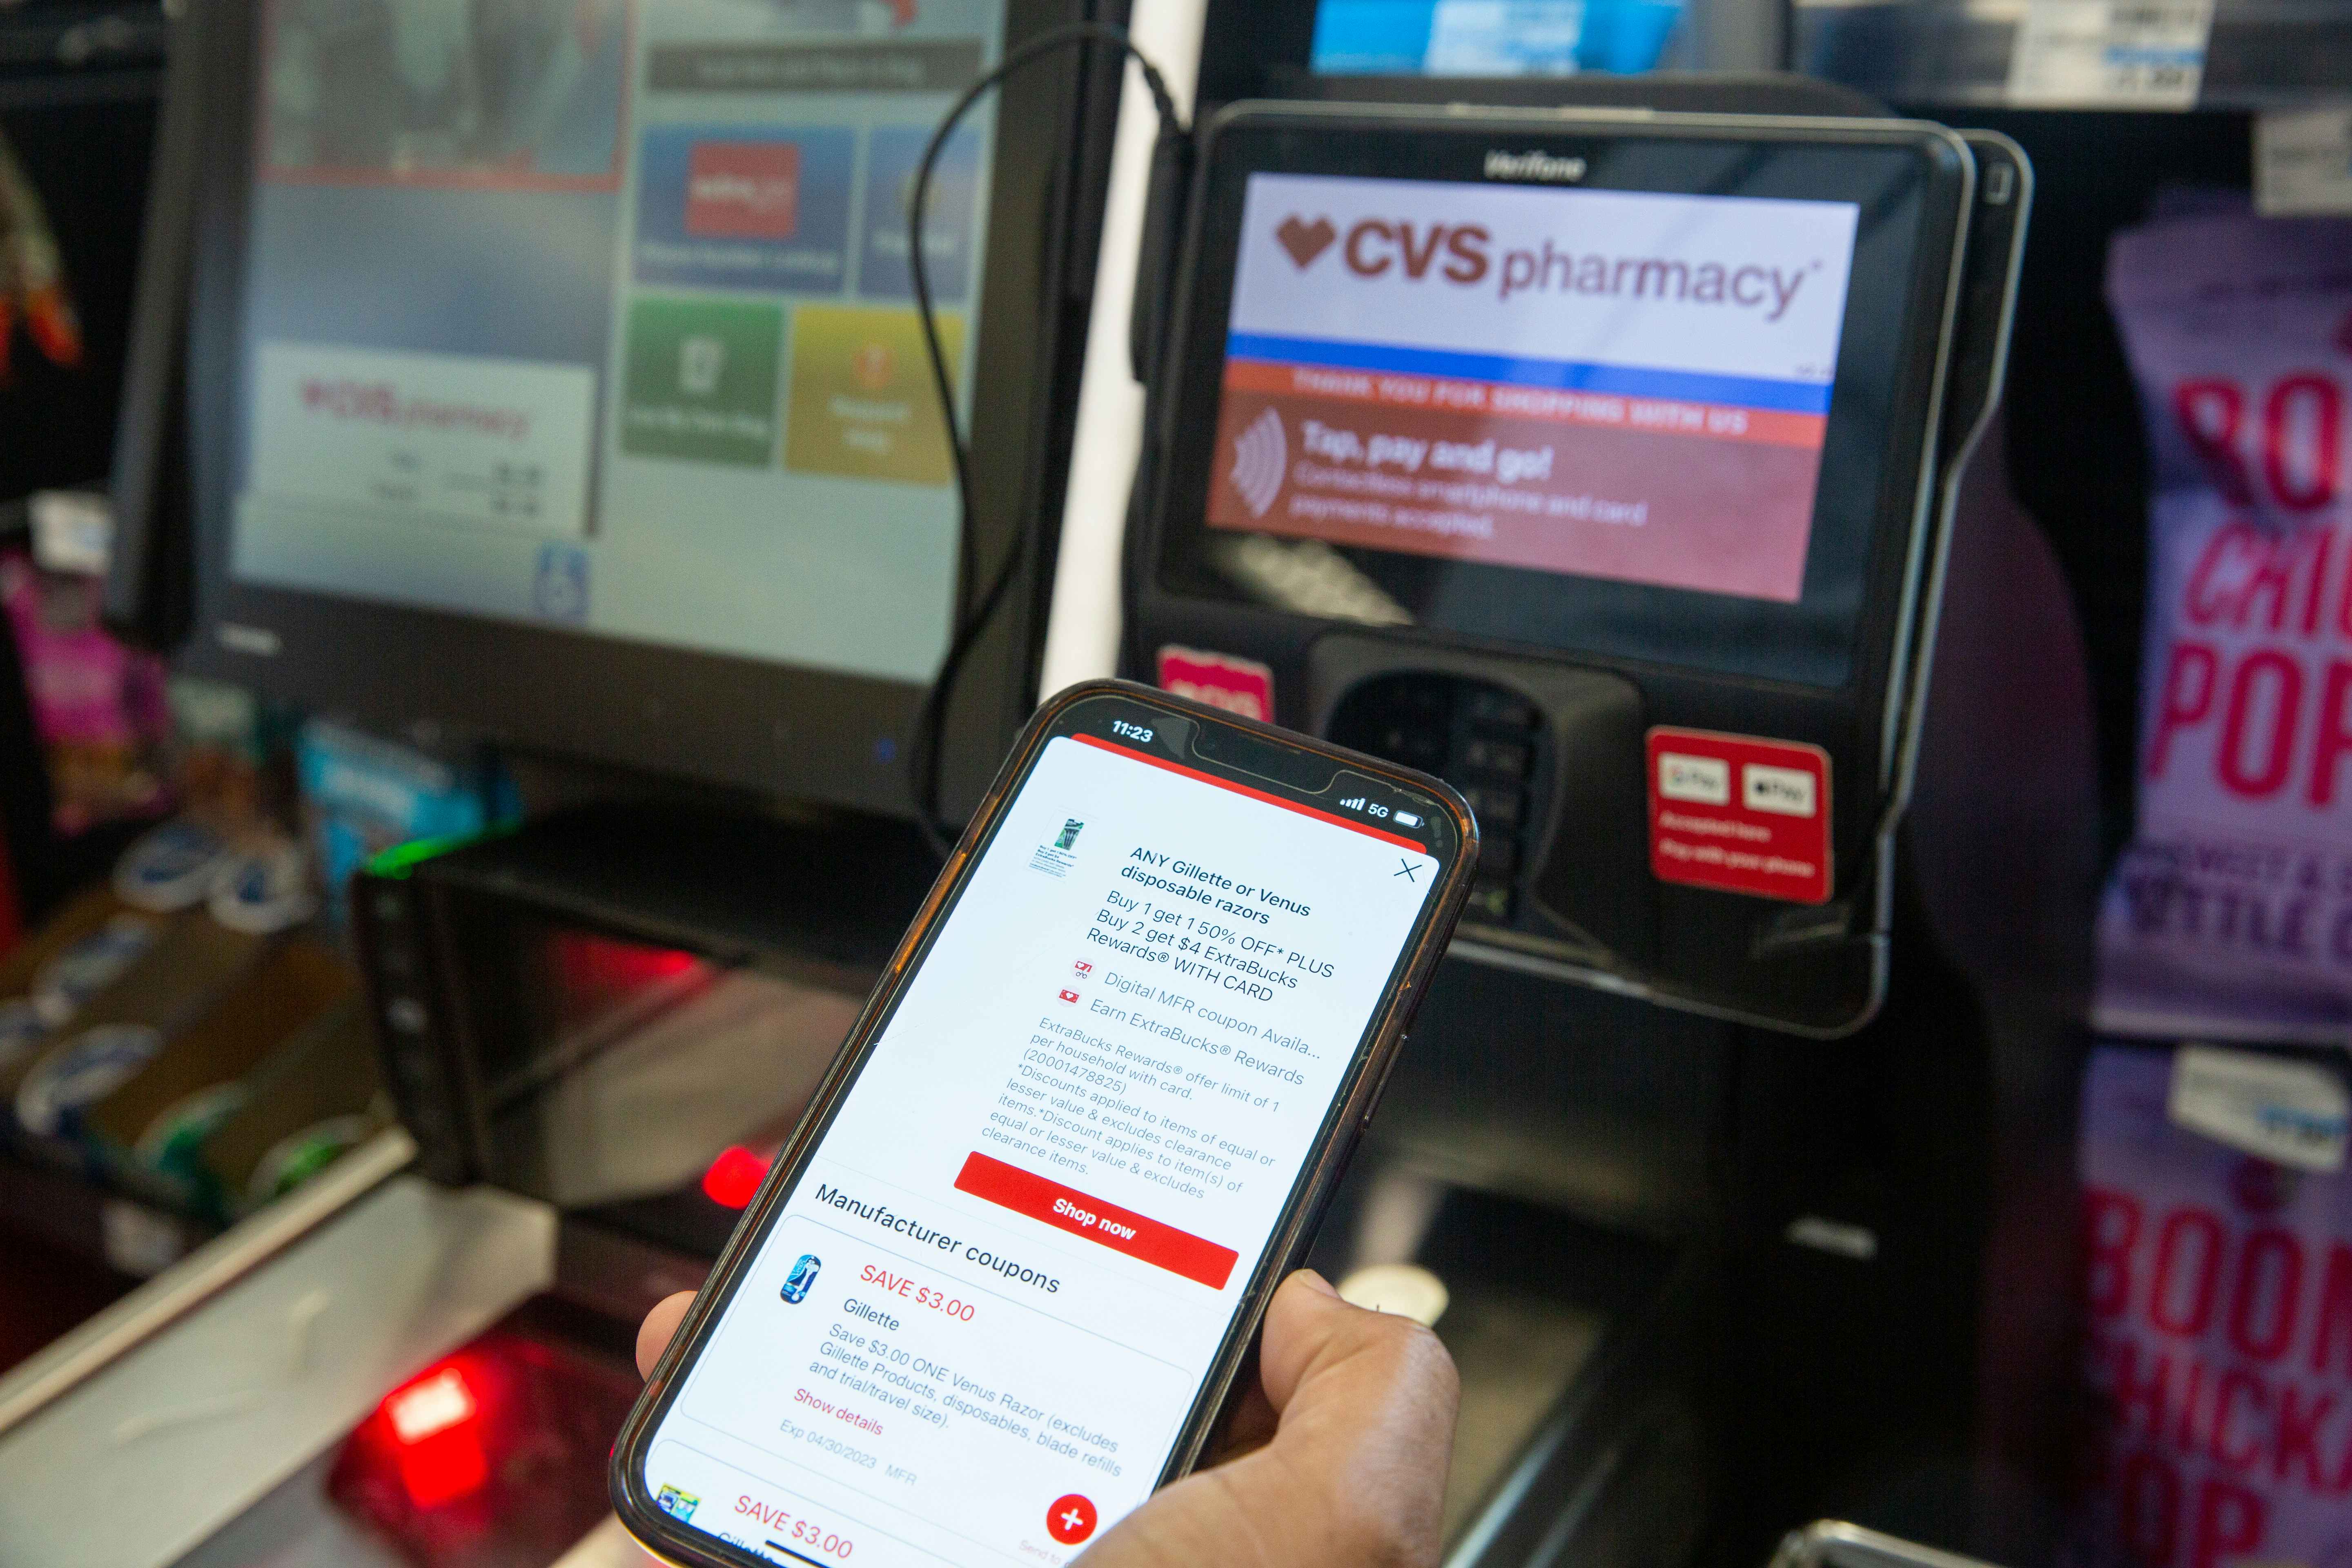  Showing digital coupons on the CVS app in front of the self-checkout